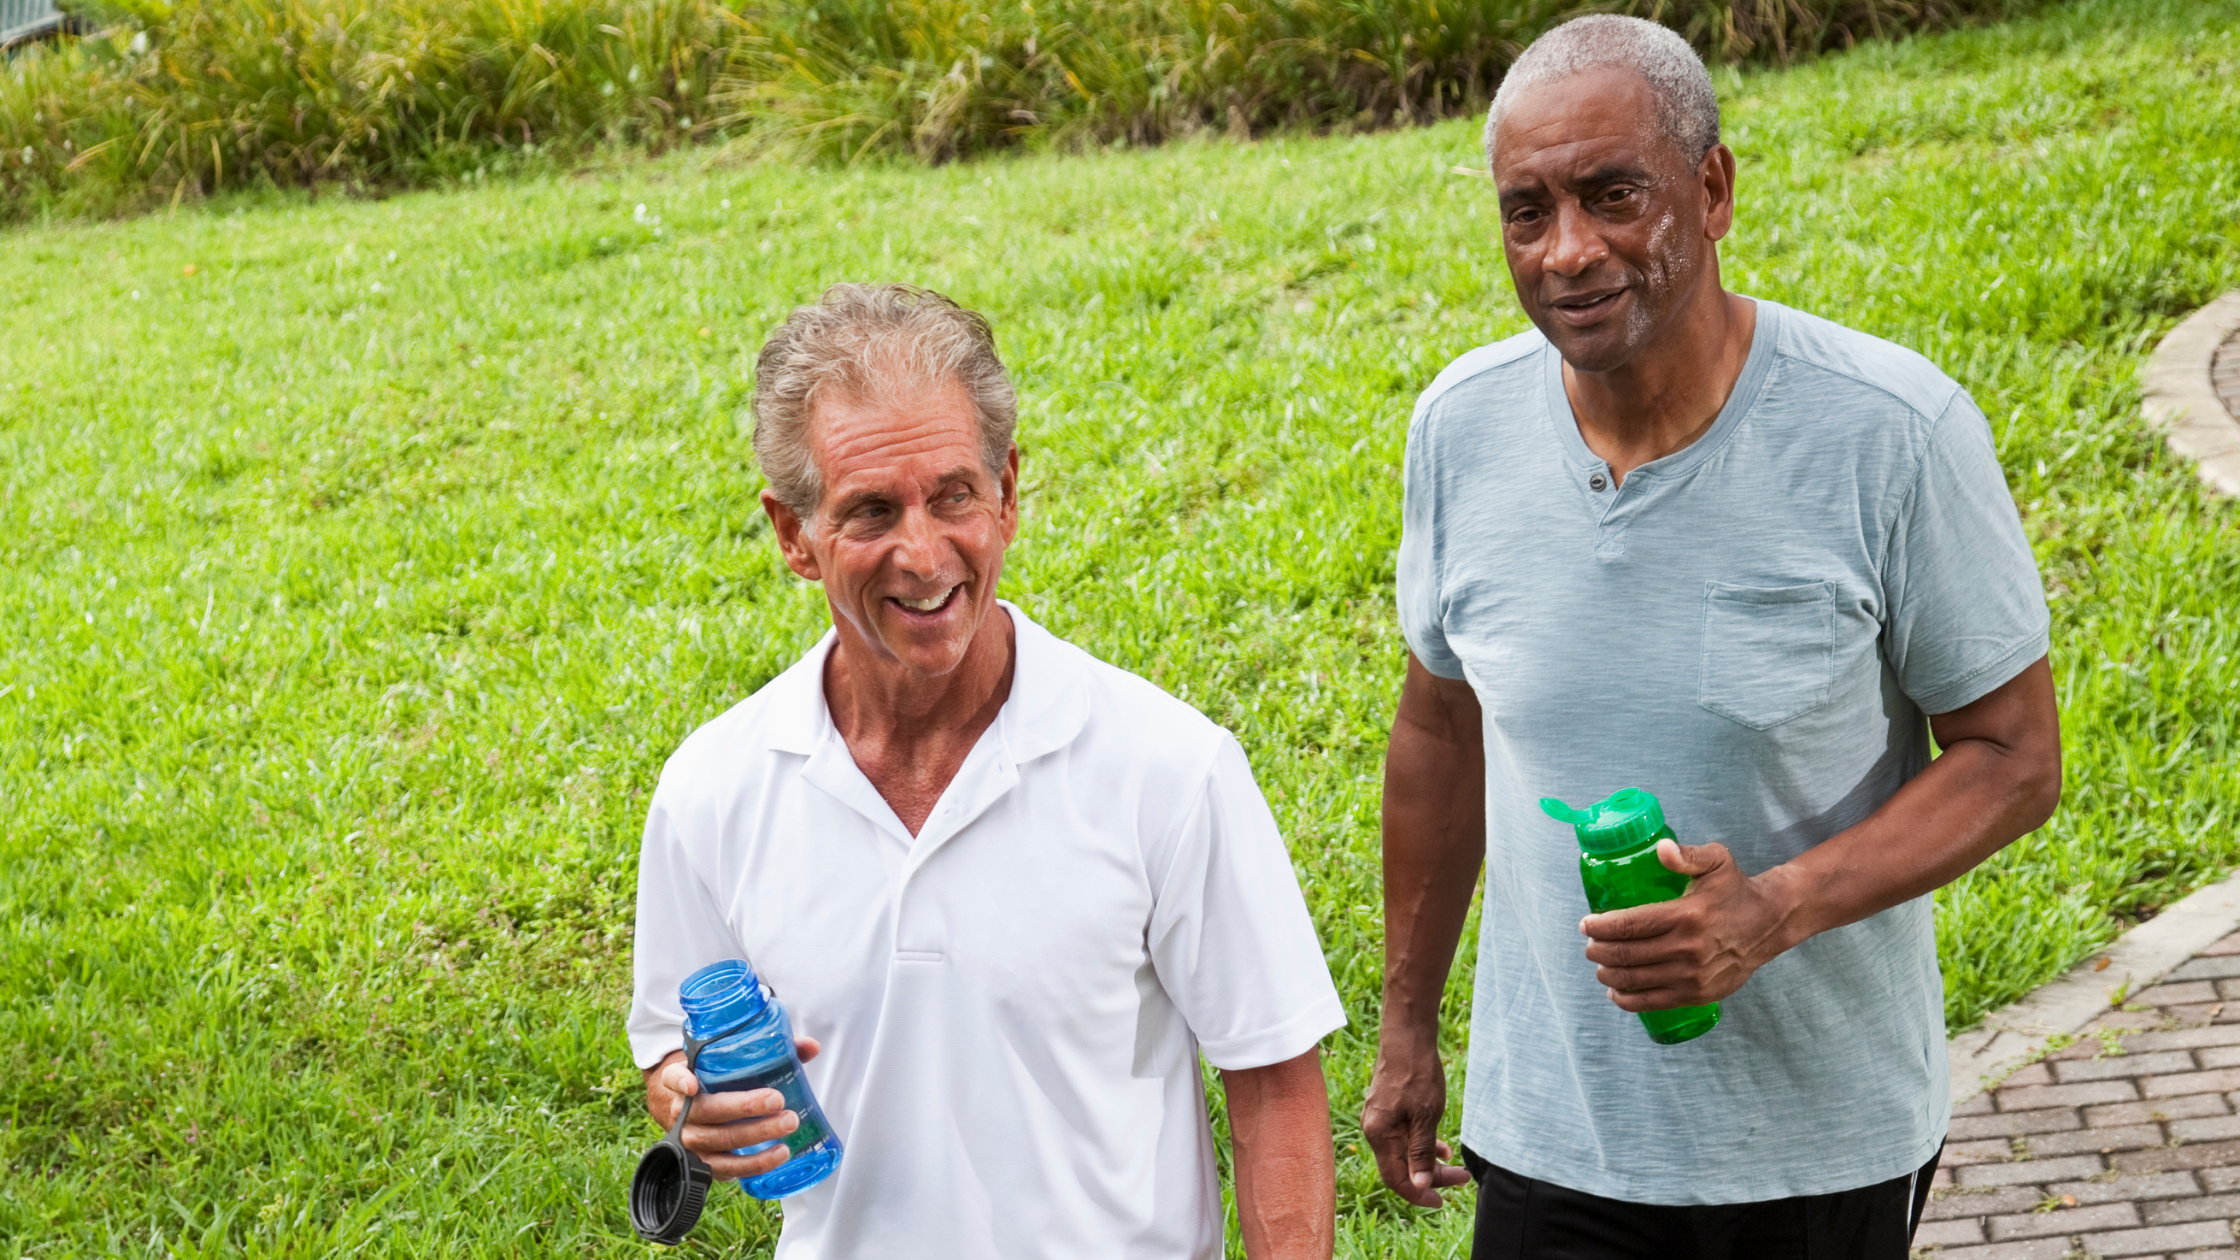 Two smiling older men outside sweating after a workout with bottles of water in their hands